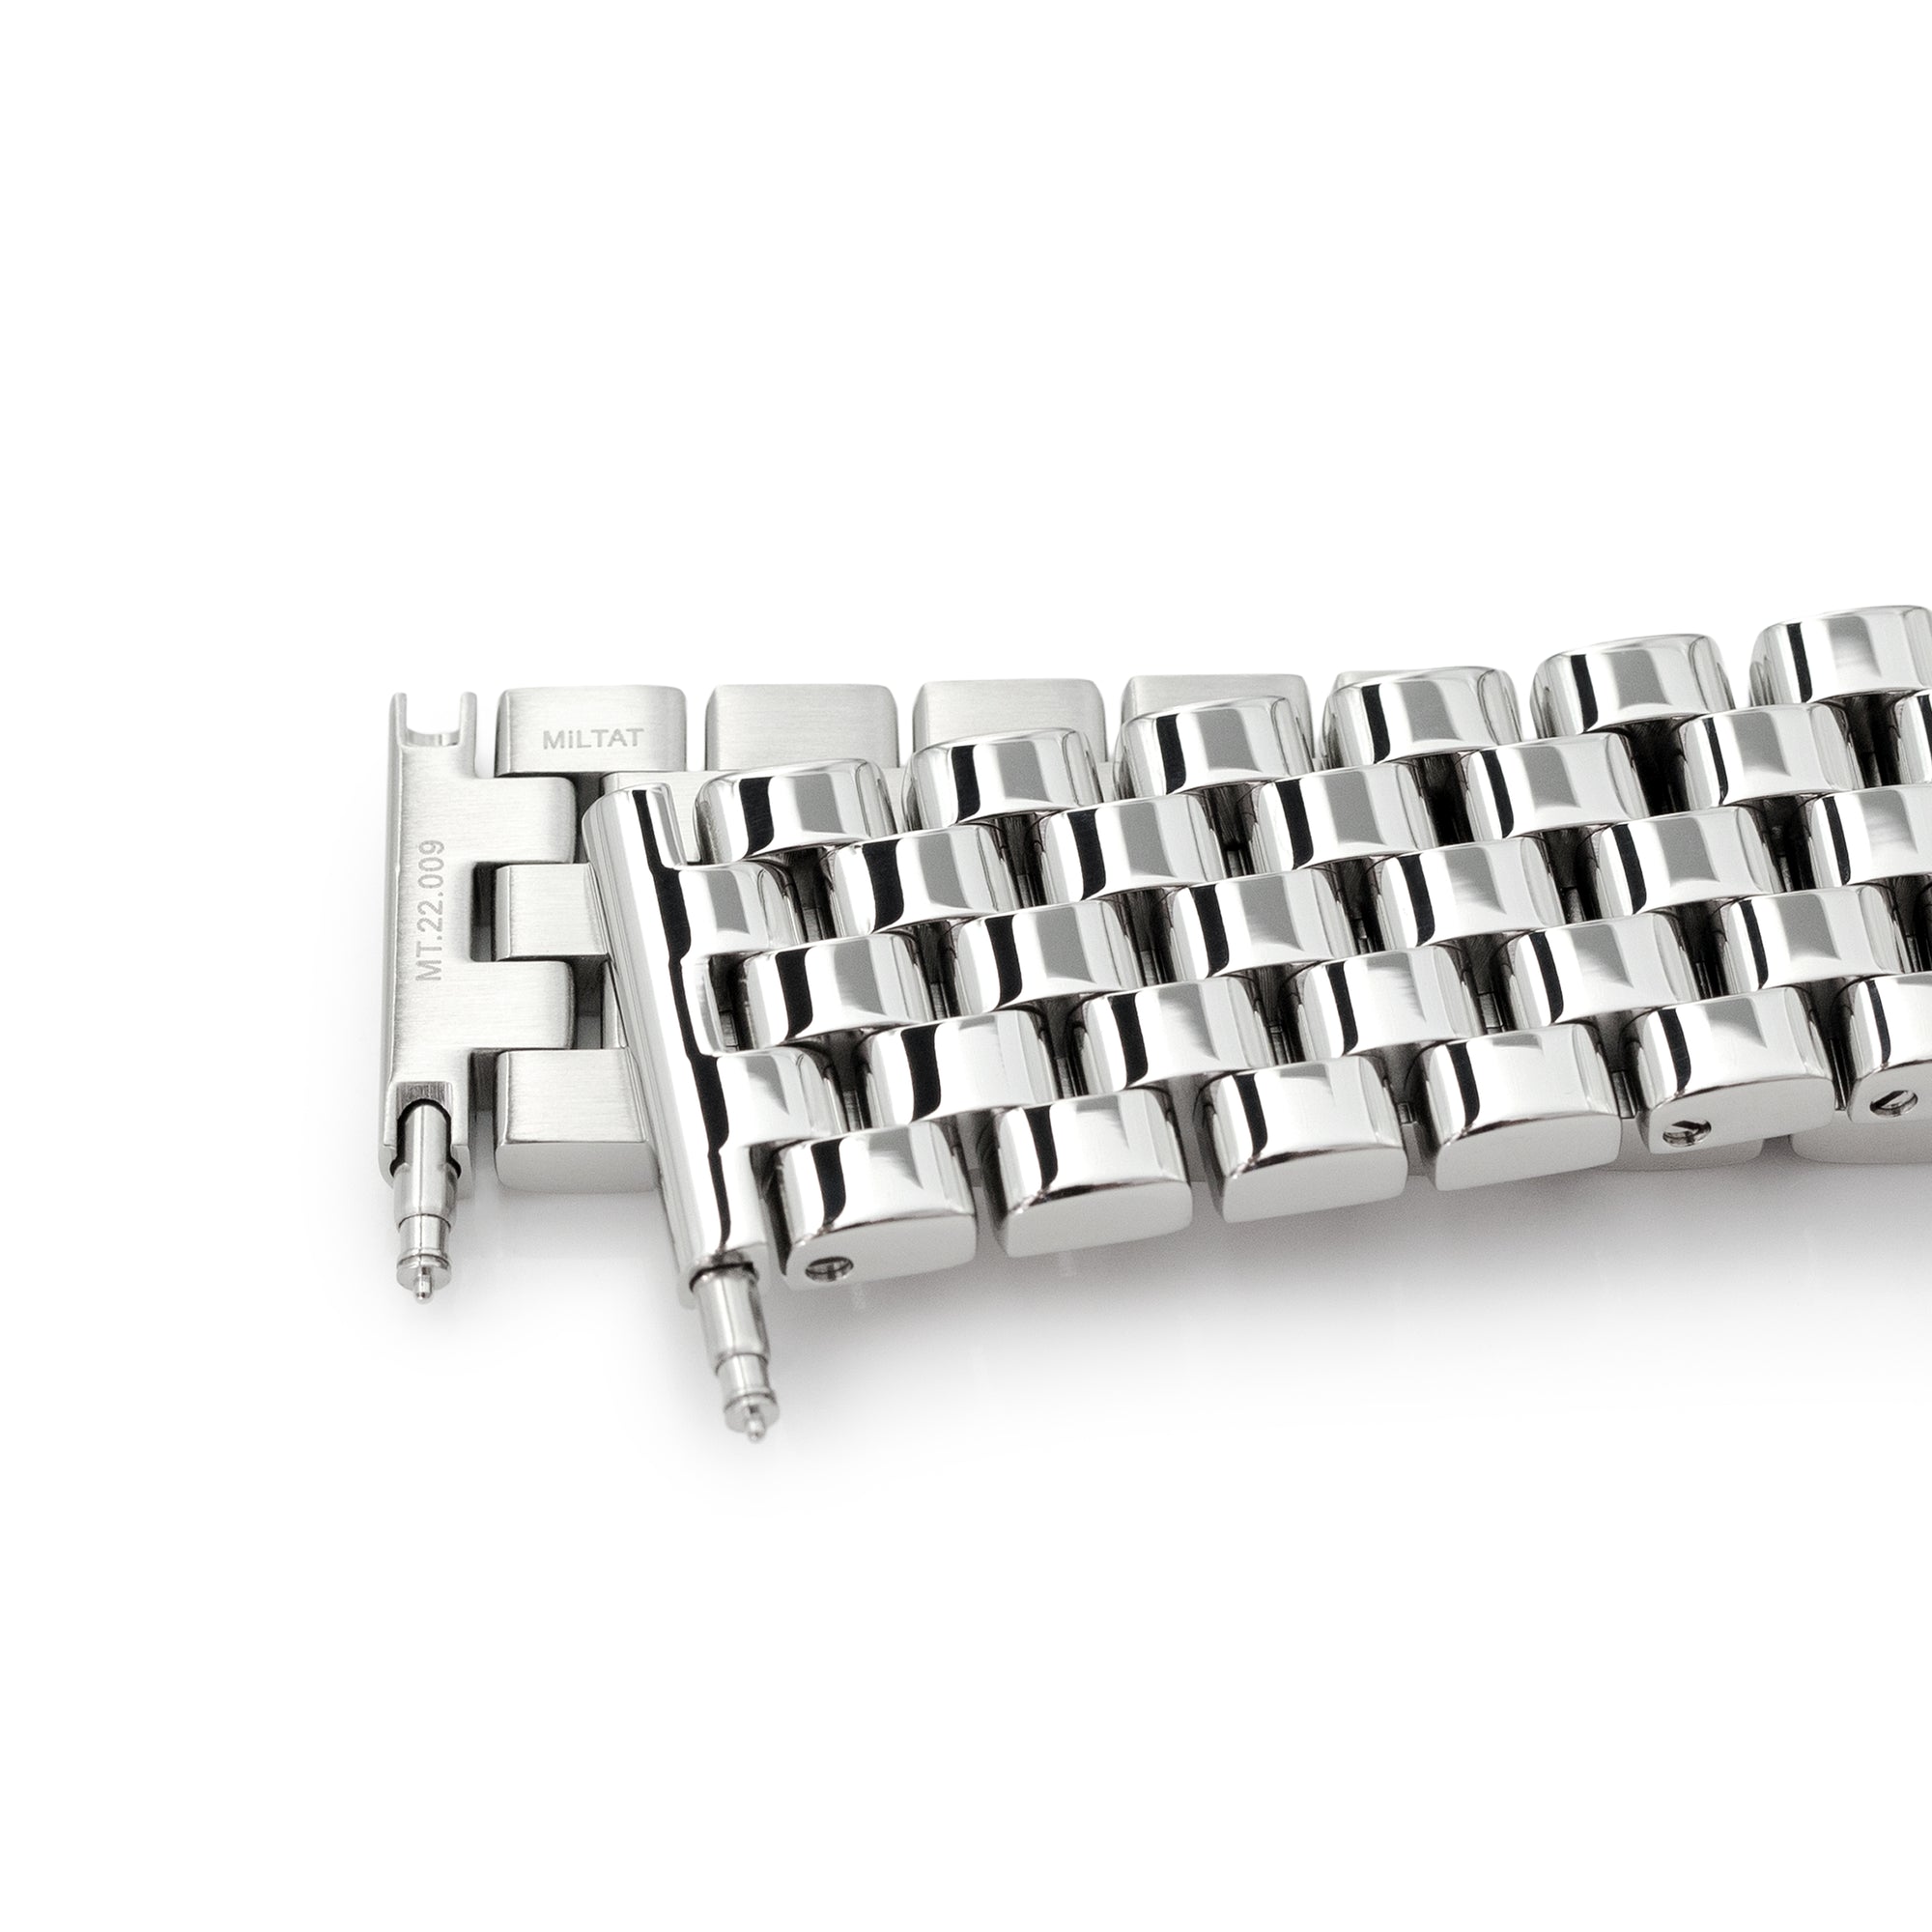 Polished Watch Band Straight End, Super Engineer I 316L Stainless Steel